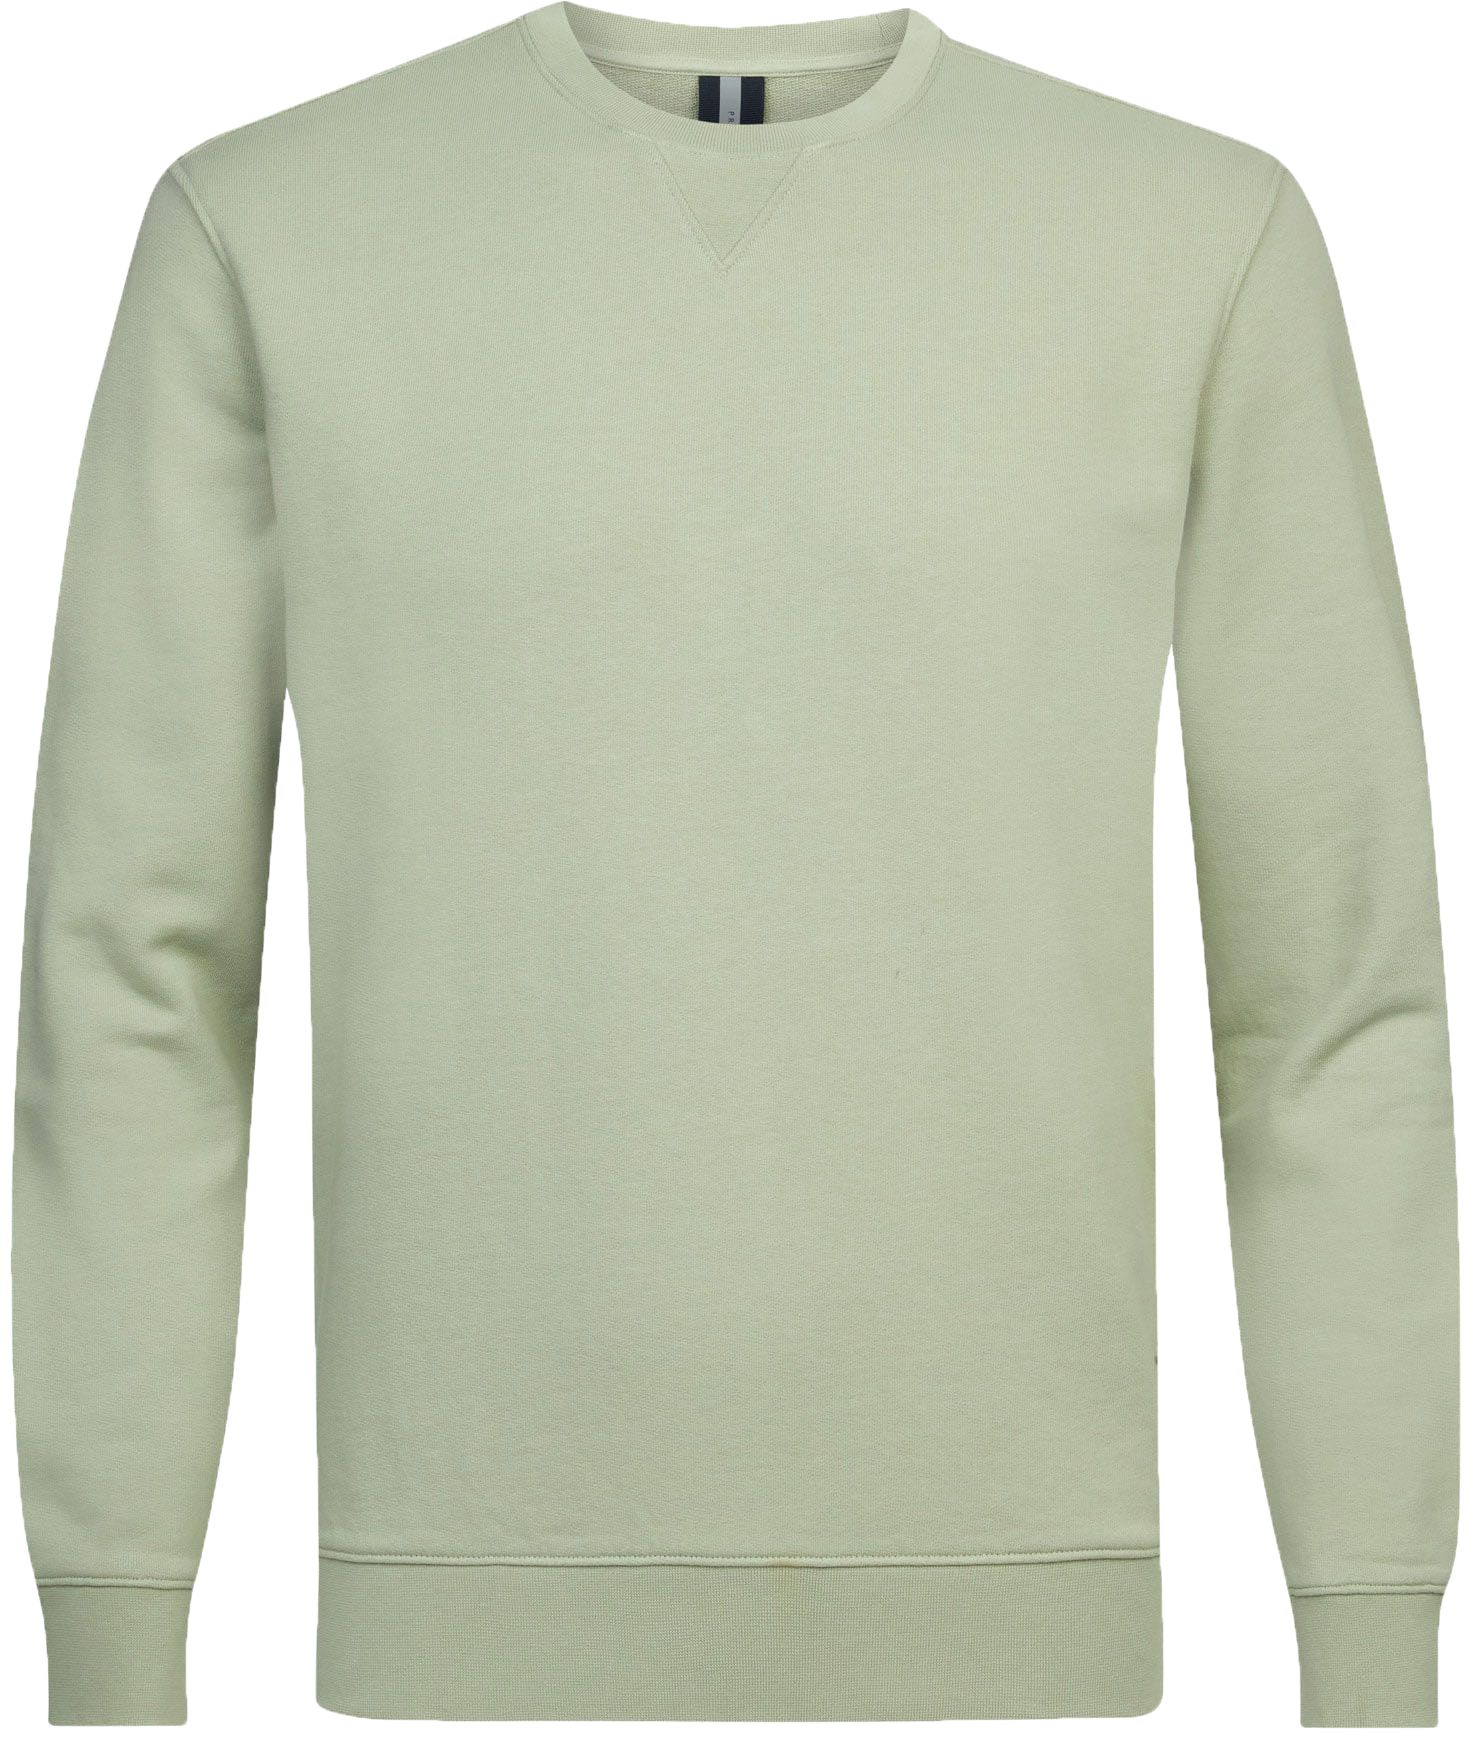 Profuomo Sweater Olive Beige Green size L